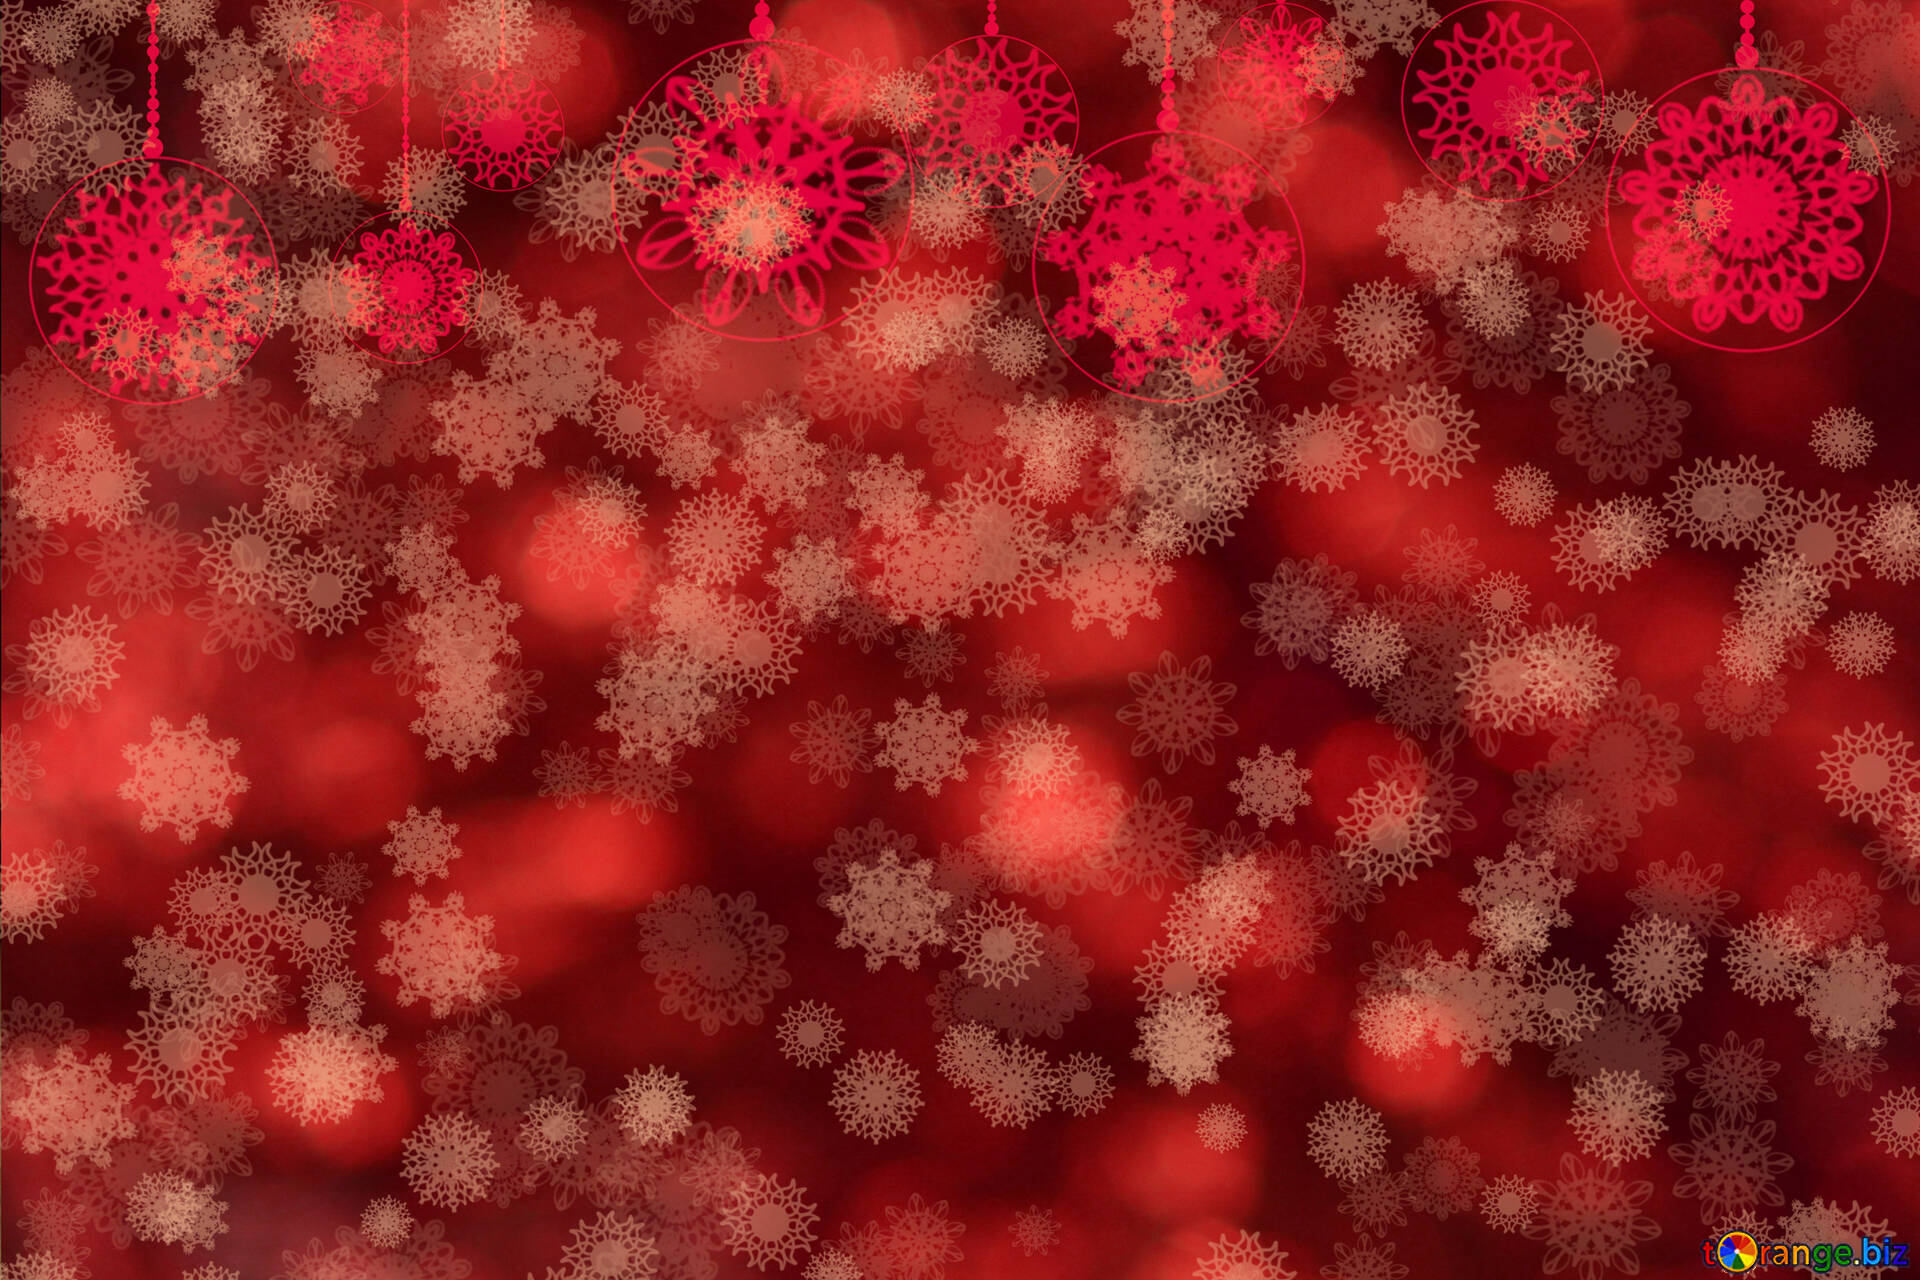 New year and christmas snowflakes image red winter background with snowflakes images clipart â free pics on cc